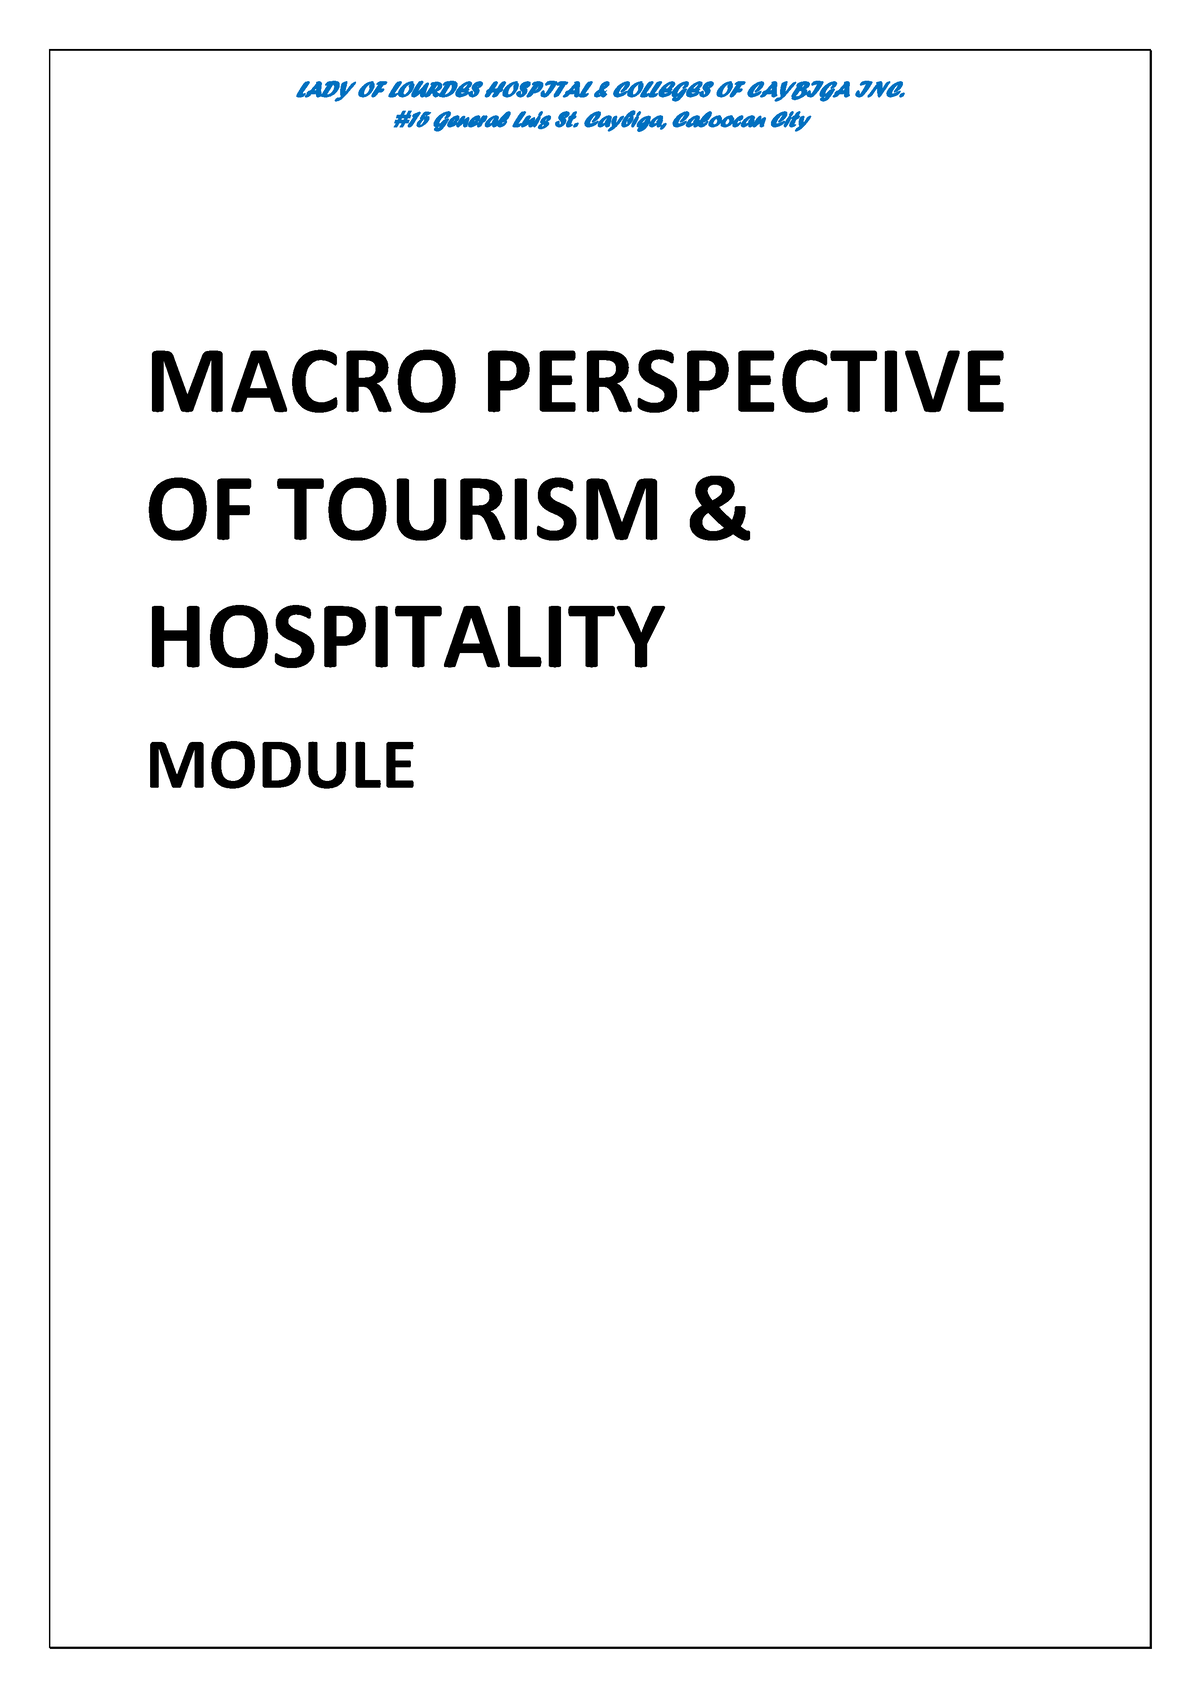 essay about macro perspective of tourism and hospitality